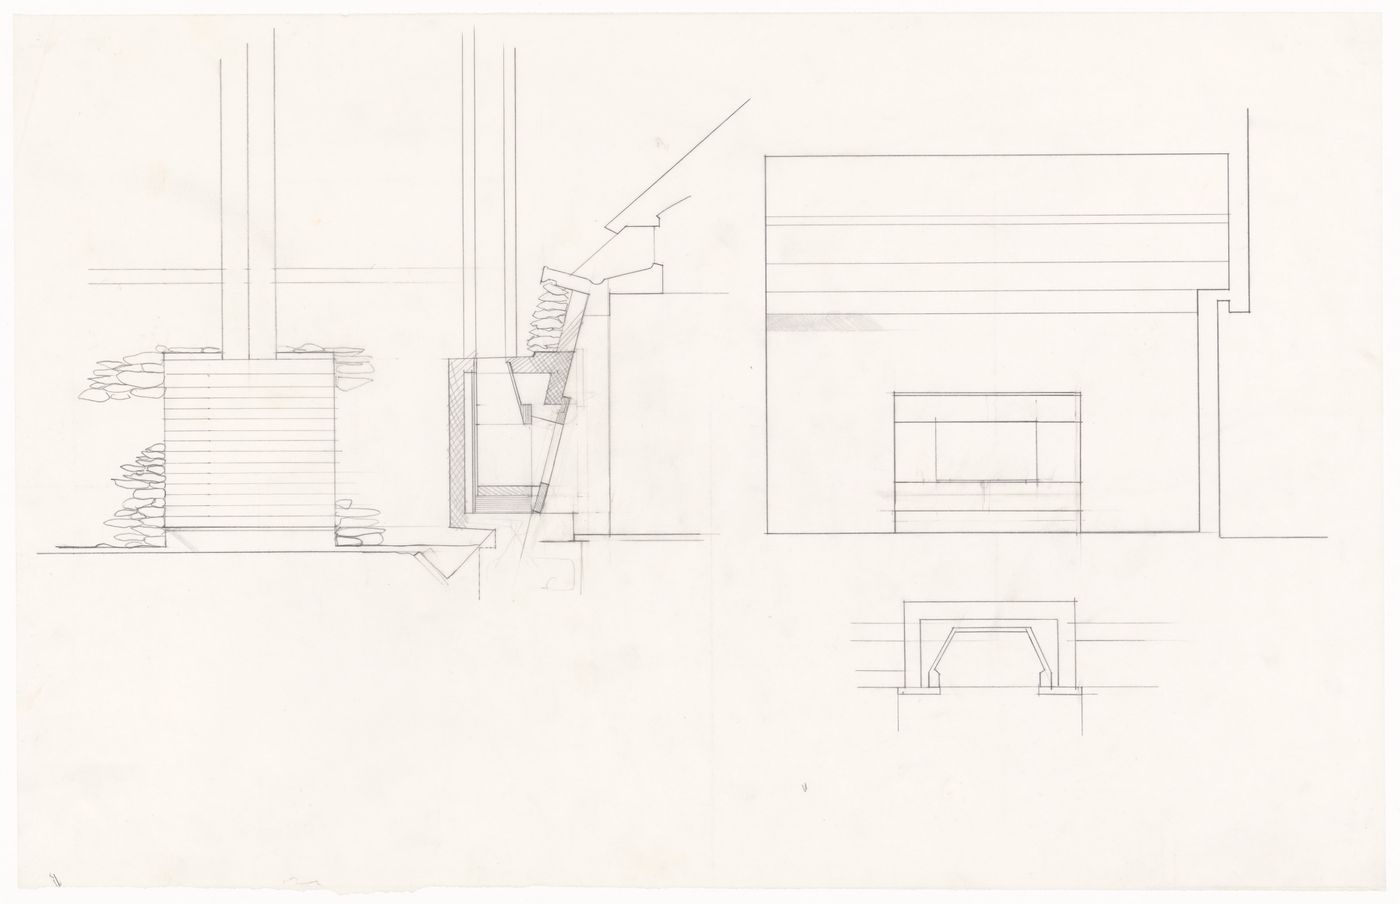 Sections and details for Casa Tabanelli, Stintino, Italy